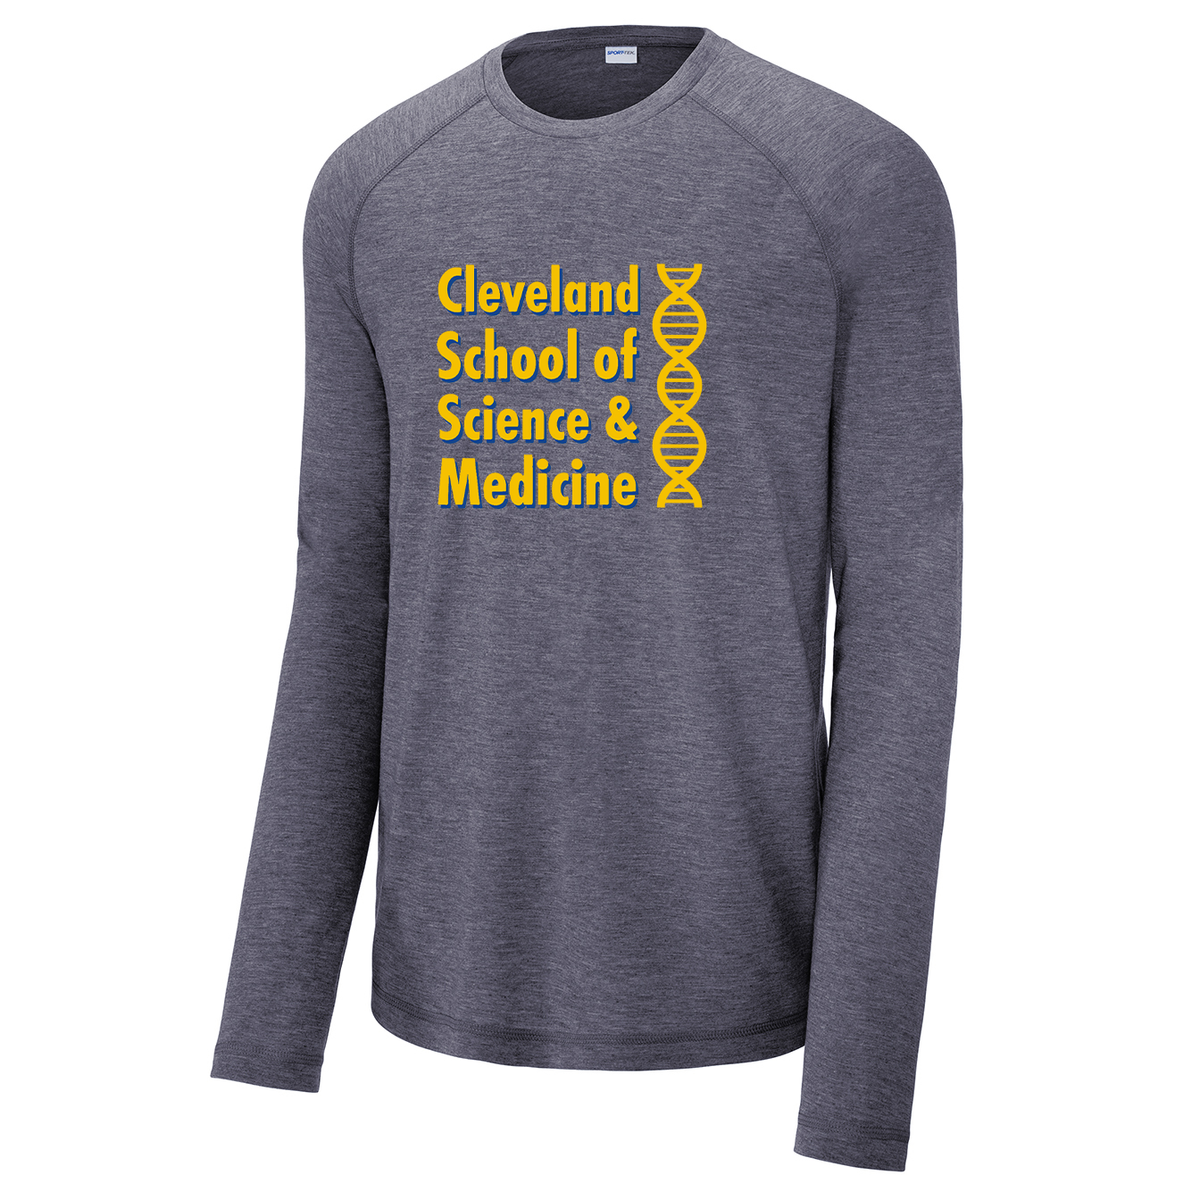 Cleveland School of Science and Medicine Long Sleeve Raglan CottonTouch